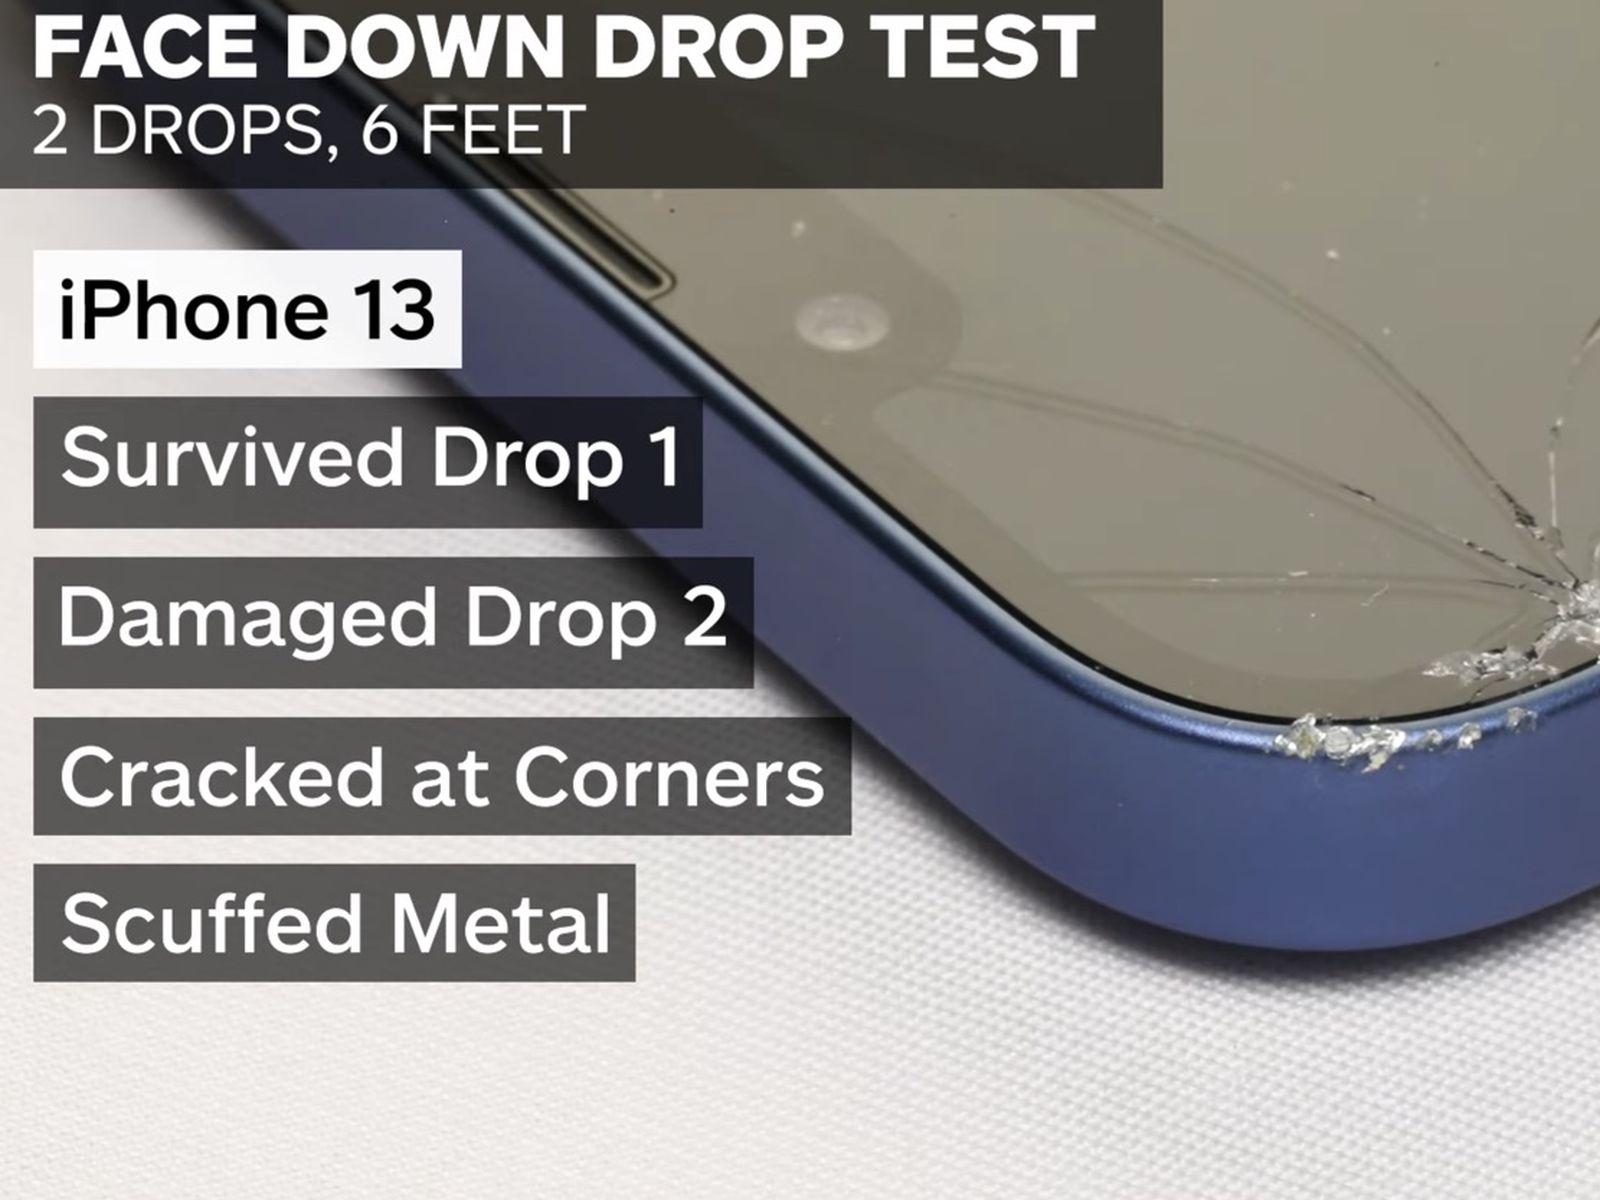 How many drops can an iPhone 13 take?